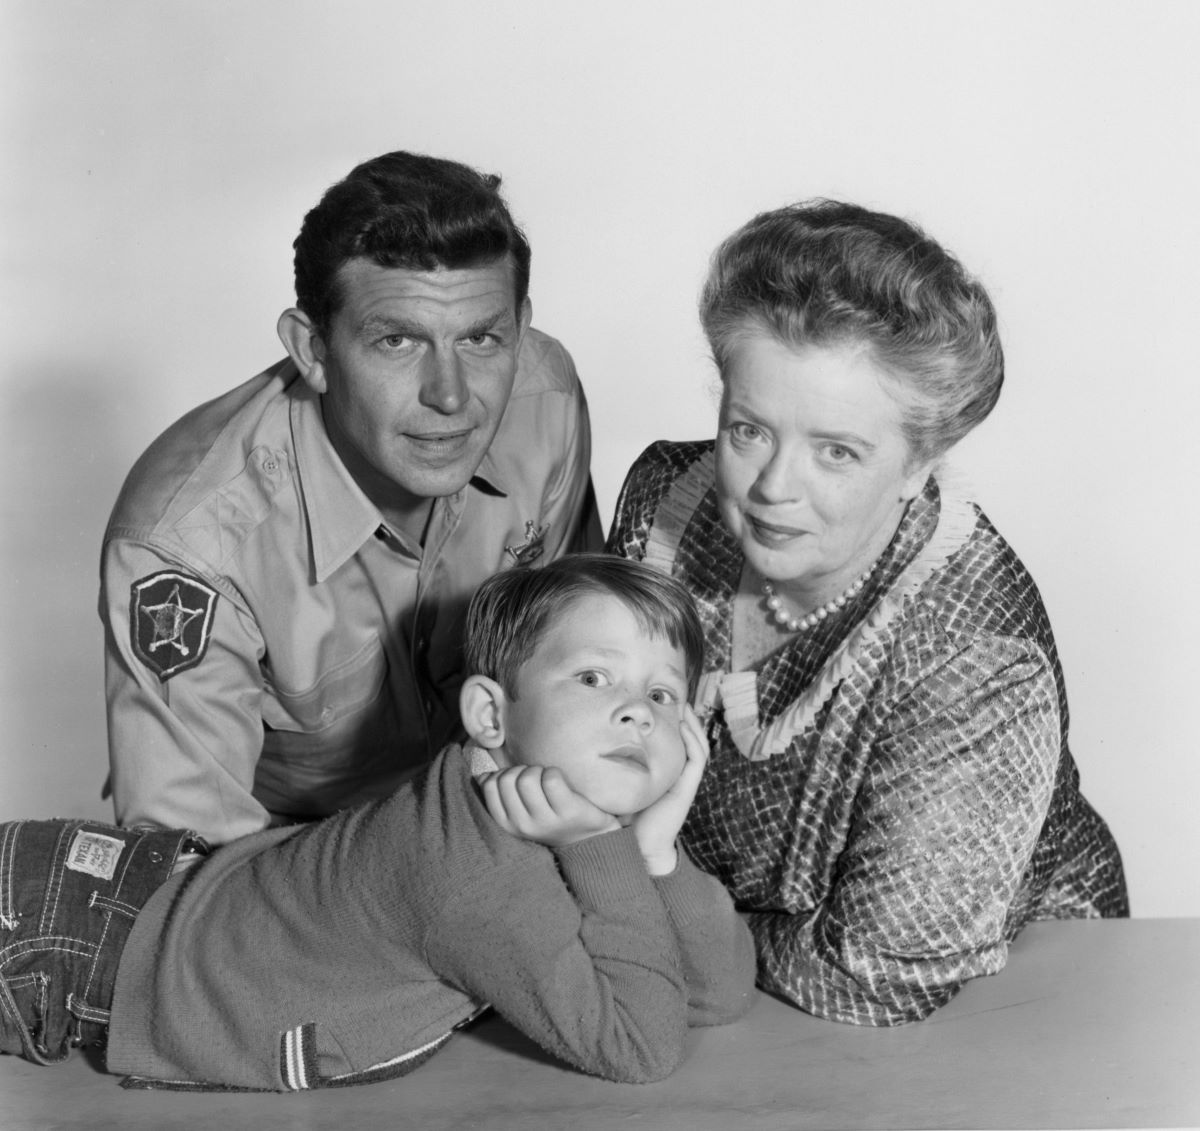 Andy Griffith (as Andy Taylor); Ron Howard (as Opie Taylor) and Frances Bavier (as Aunt Bee Taylor)